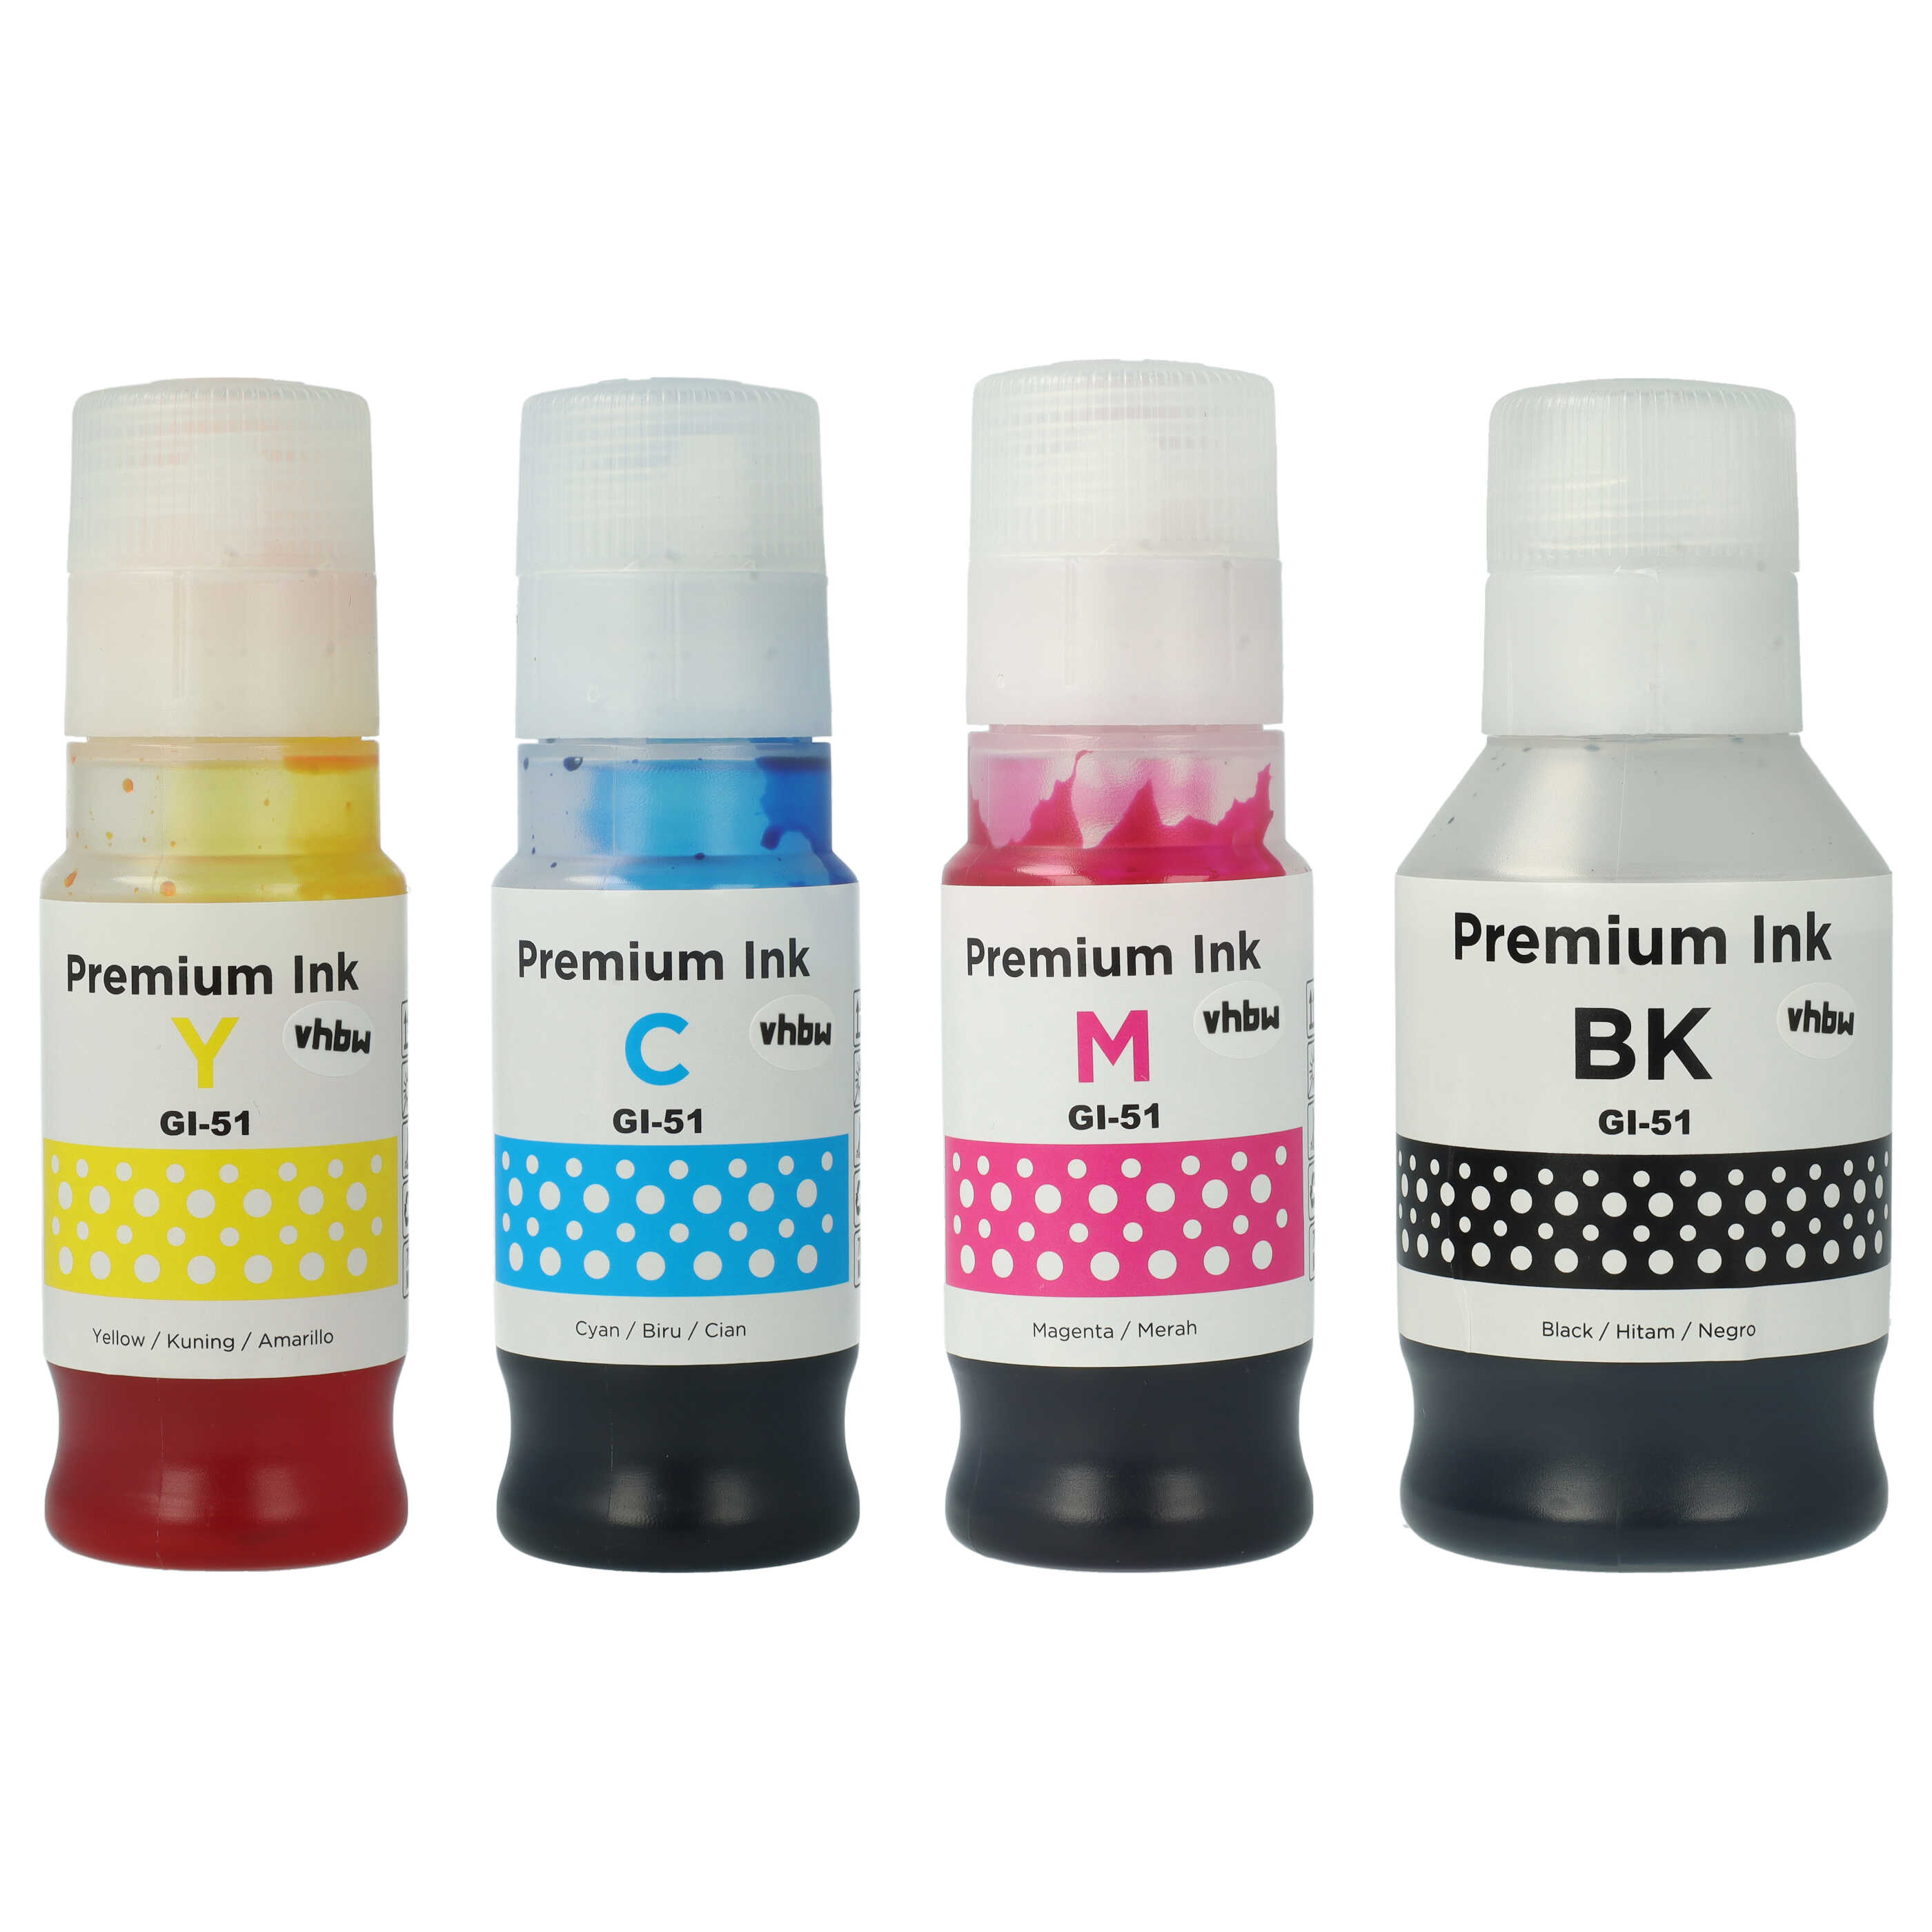 4x Refill Ink Coloured replaces Canon 4528C001, 4544C001, 4543C001 for Canon "Dye" Printers - refill set